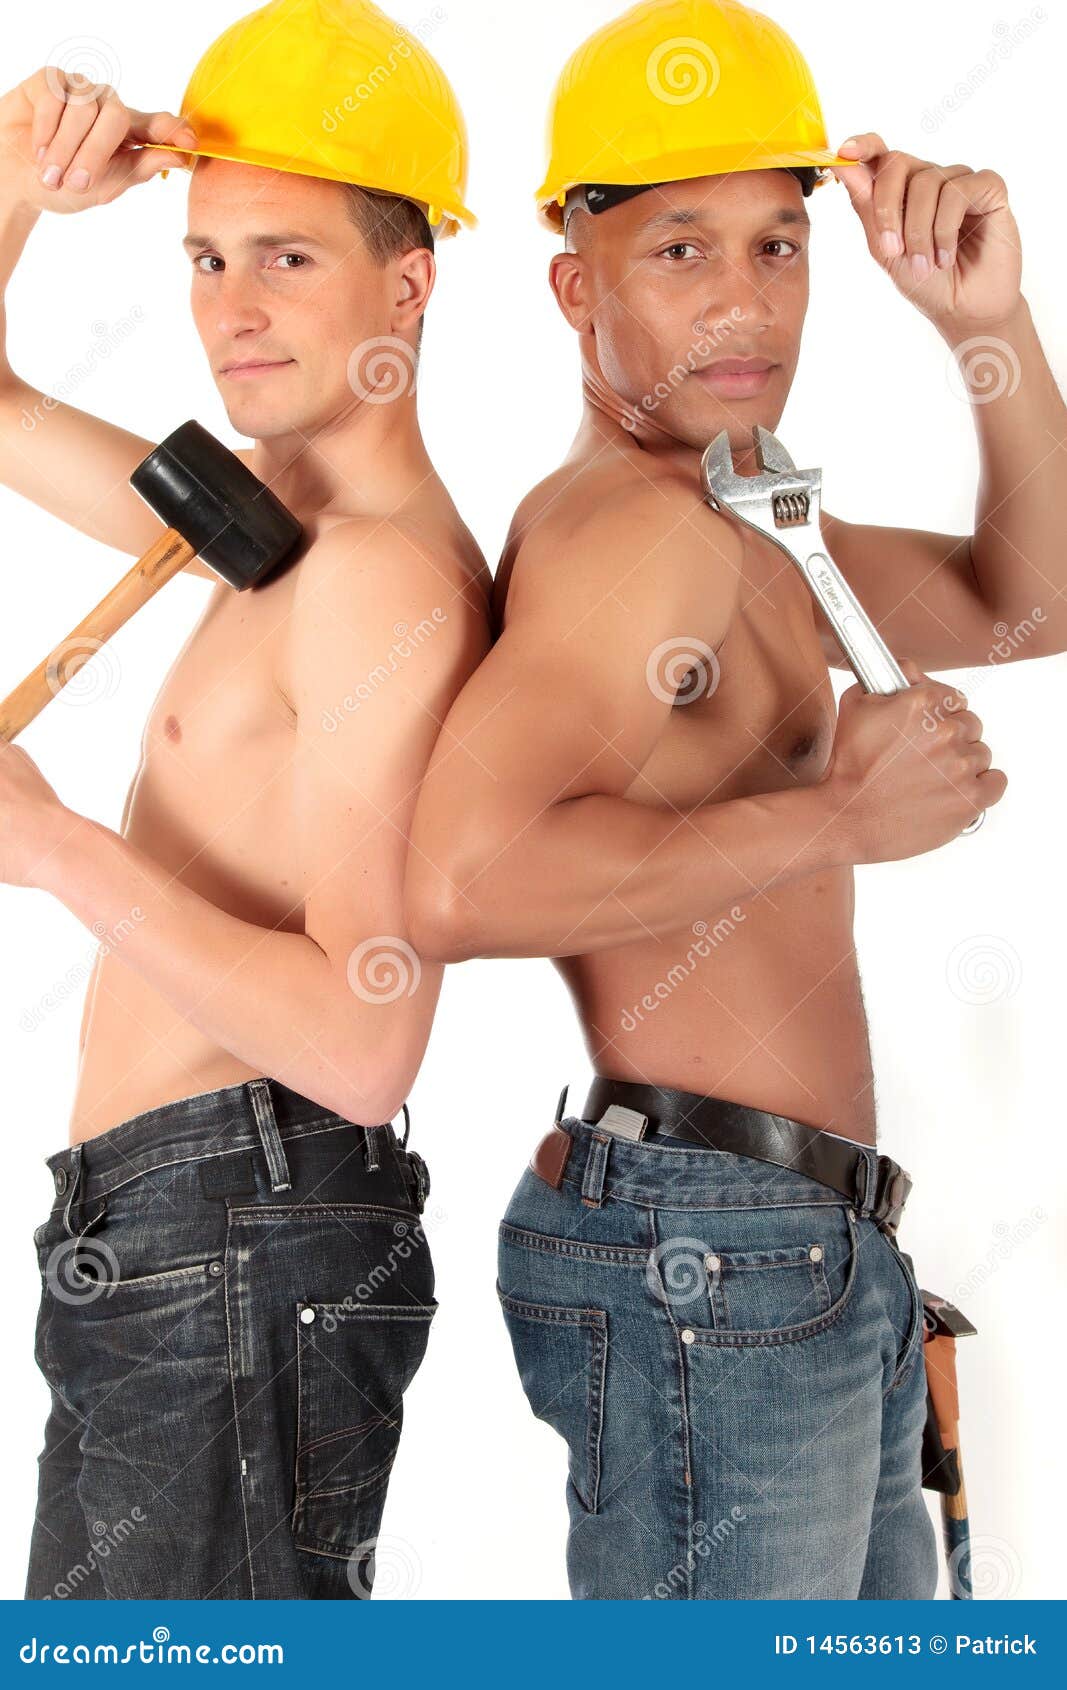 sexy-construction-workers-14563613.jpg